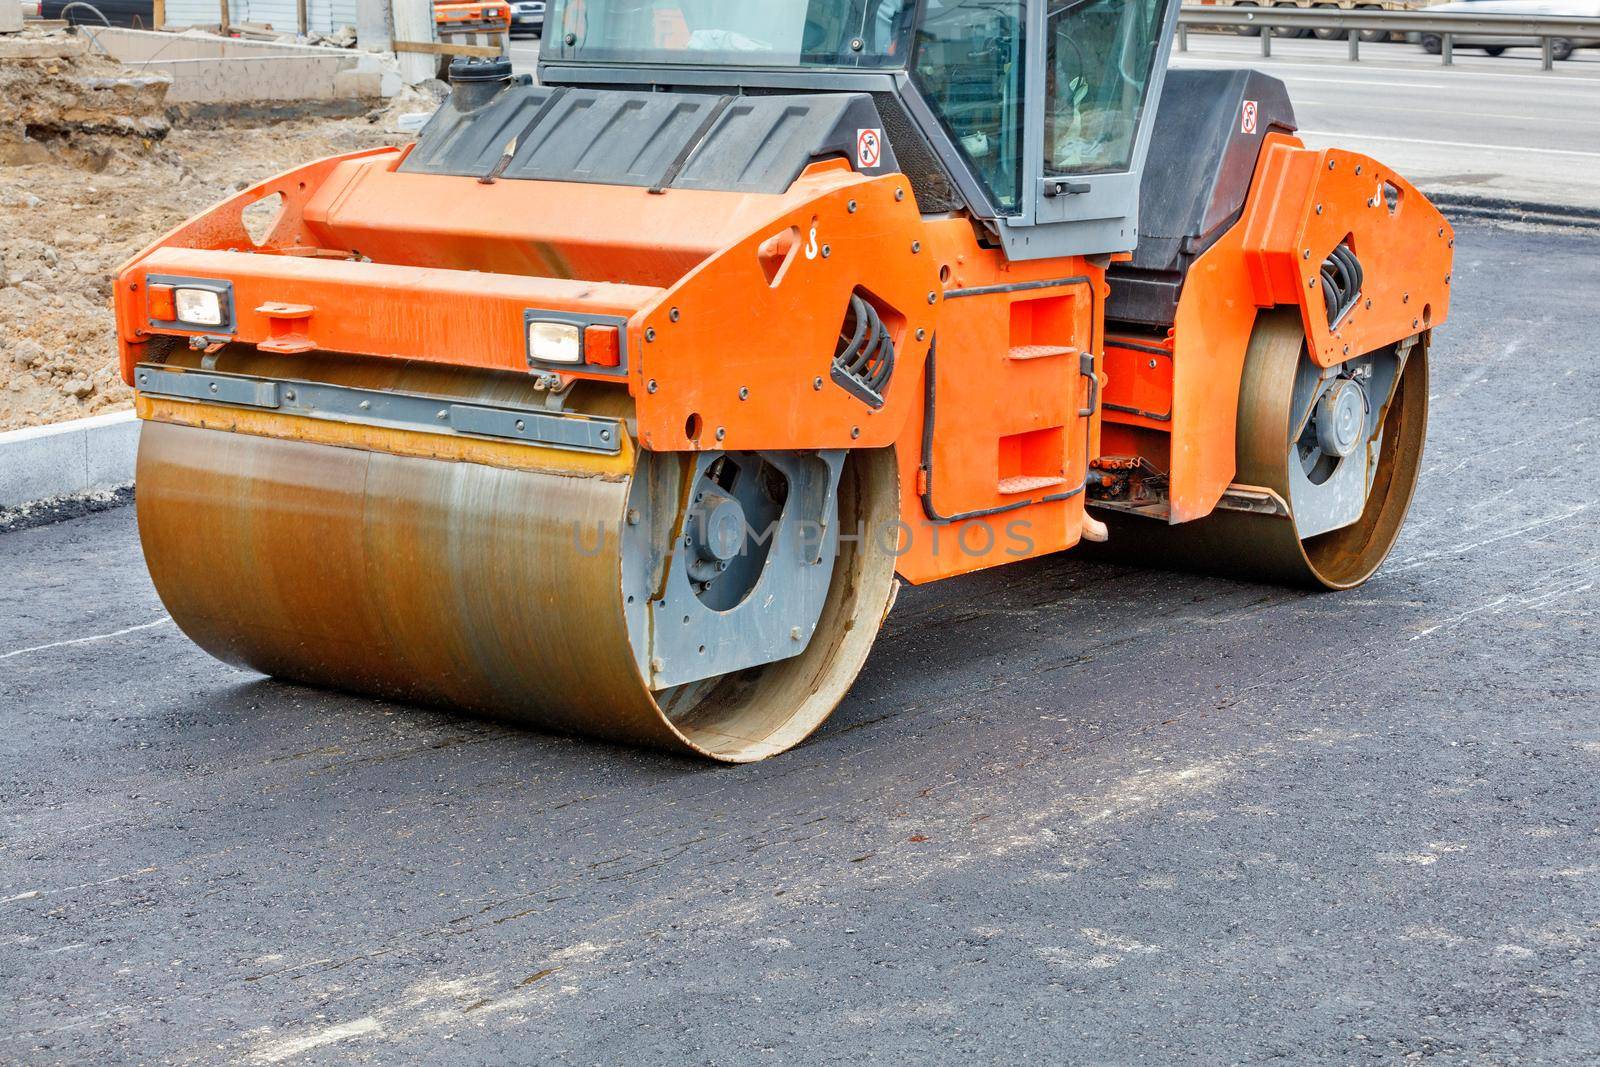 The metal cylinders of the large vibratory roller roll over the new road surface for powerful compaction of the fresh asphalt.